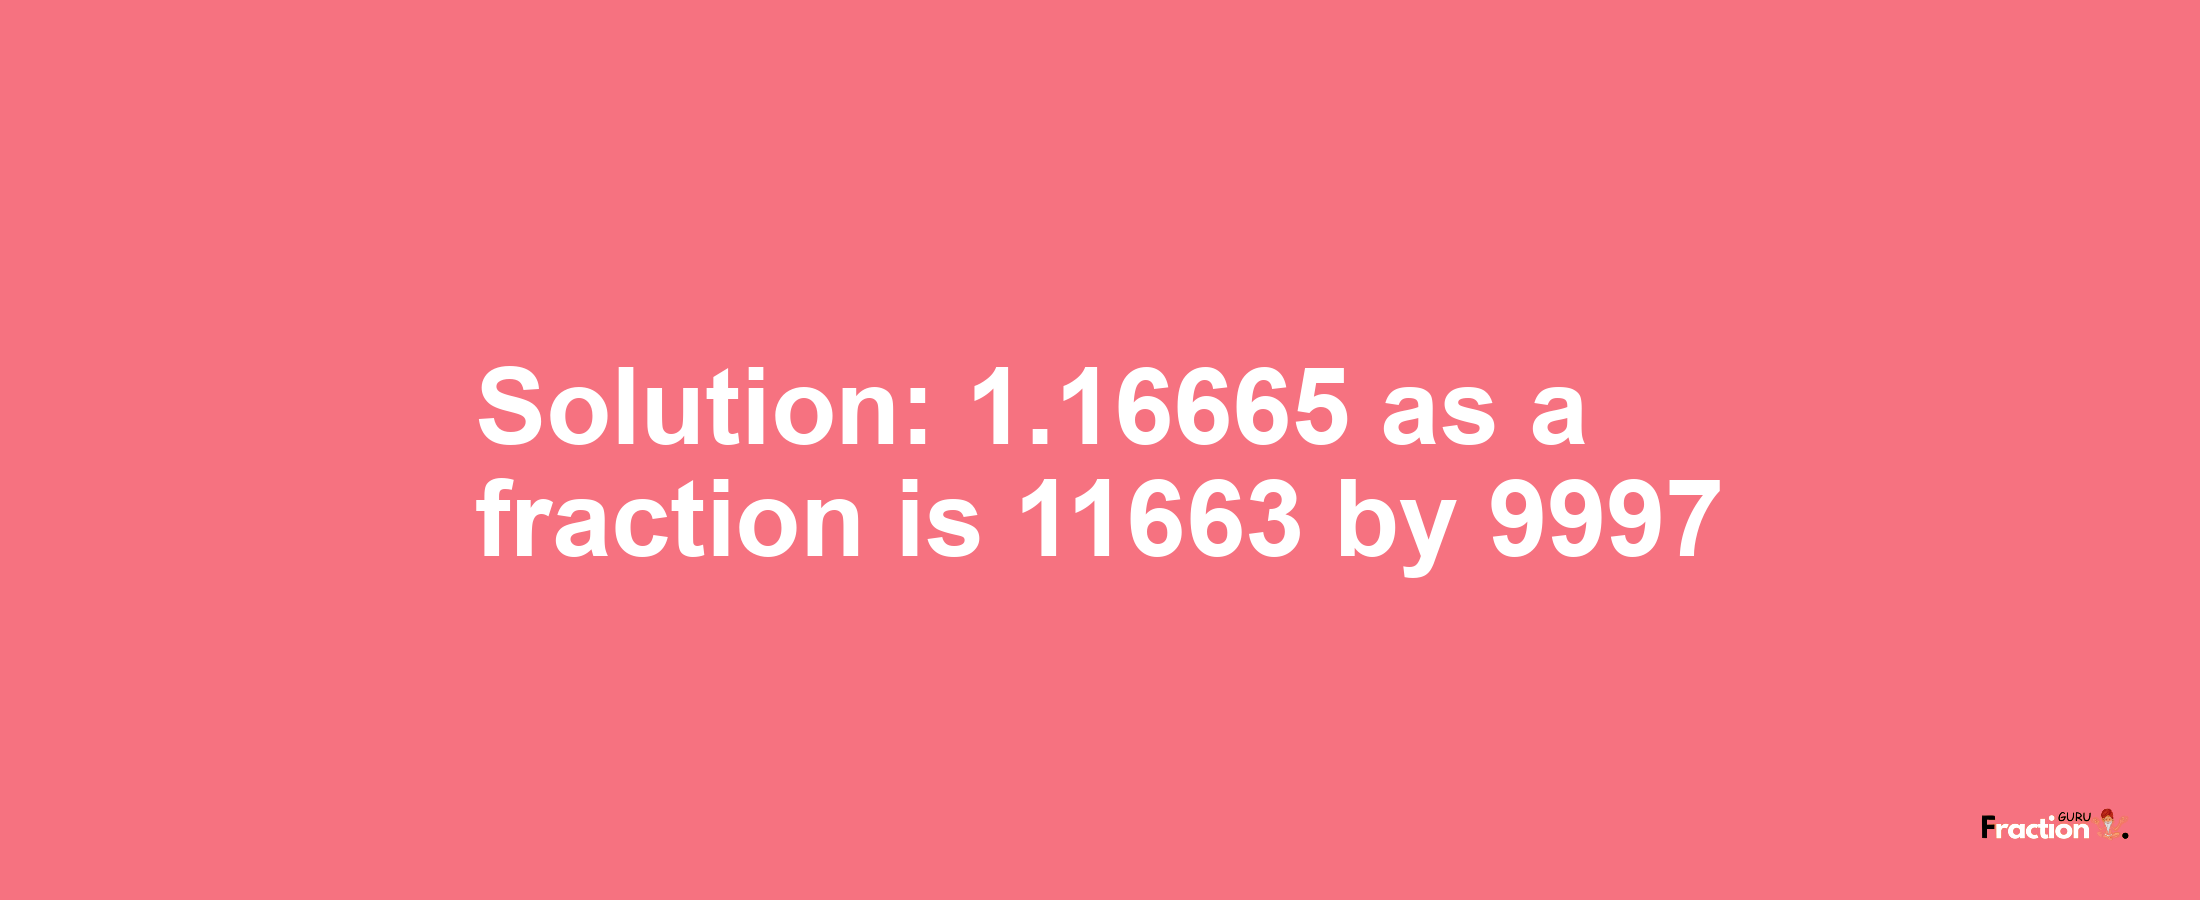 Solution:1.16665 as a fraction is 11663/9997